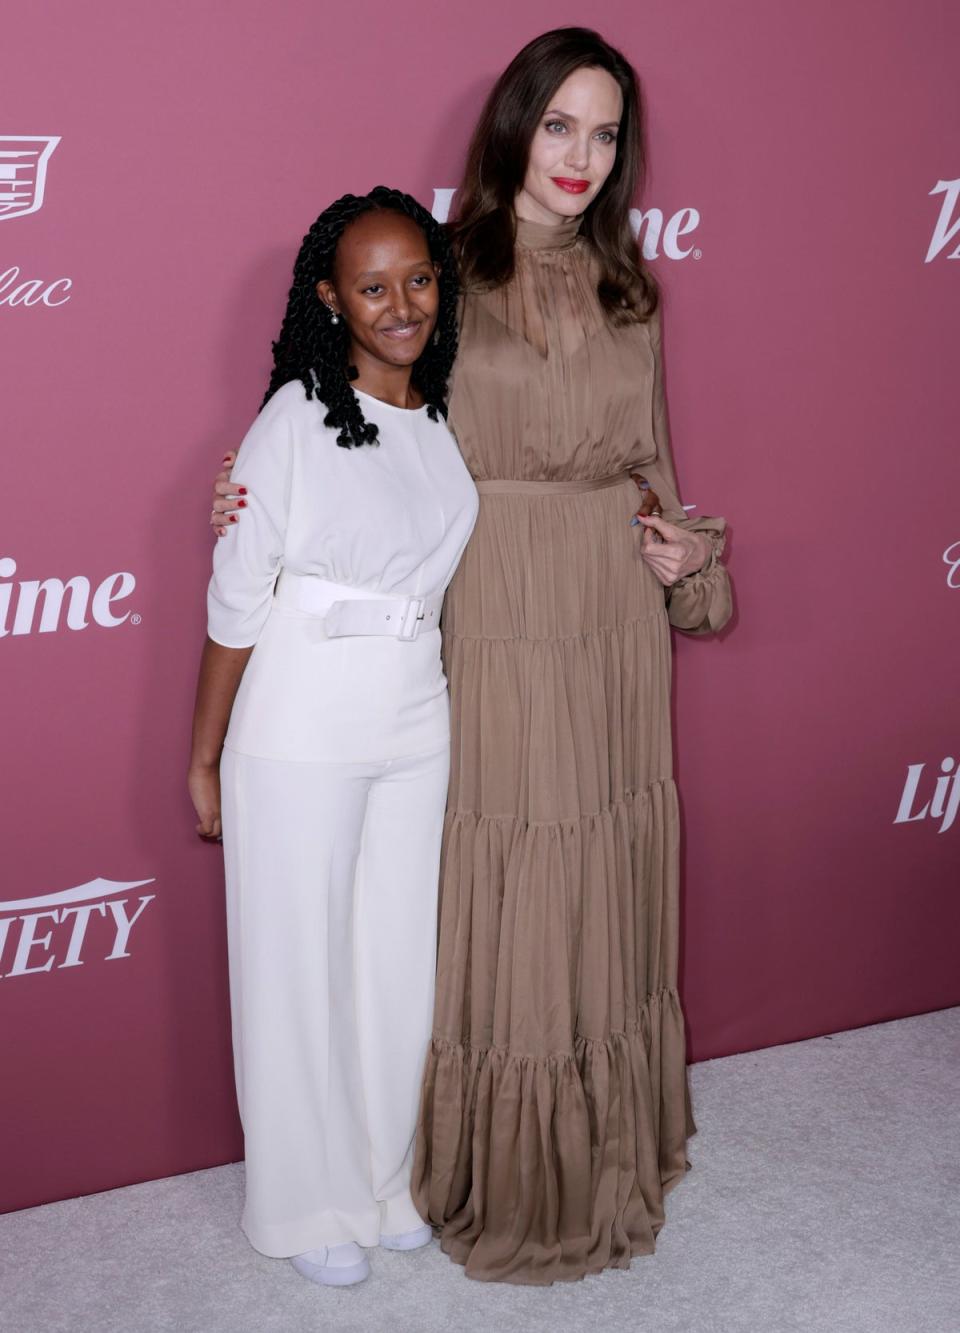 Zahara Jolie-Pitt and Angelina Jolie attend Variety's Power Of Women at Wallis Annenberg Center for the Performing Arts on September 30, 2021 in Beverly Hills, California (Getty Images)